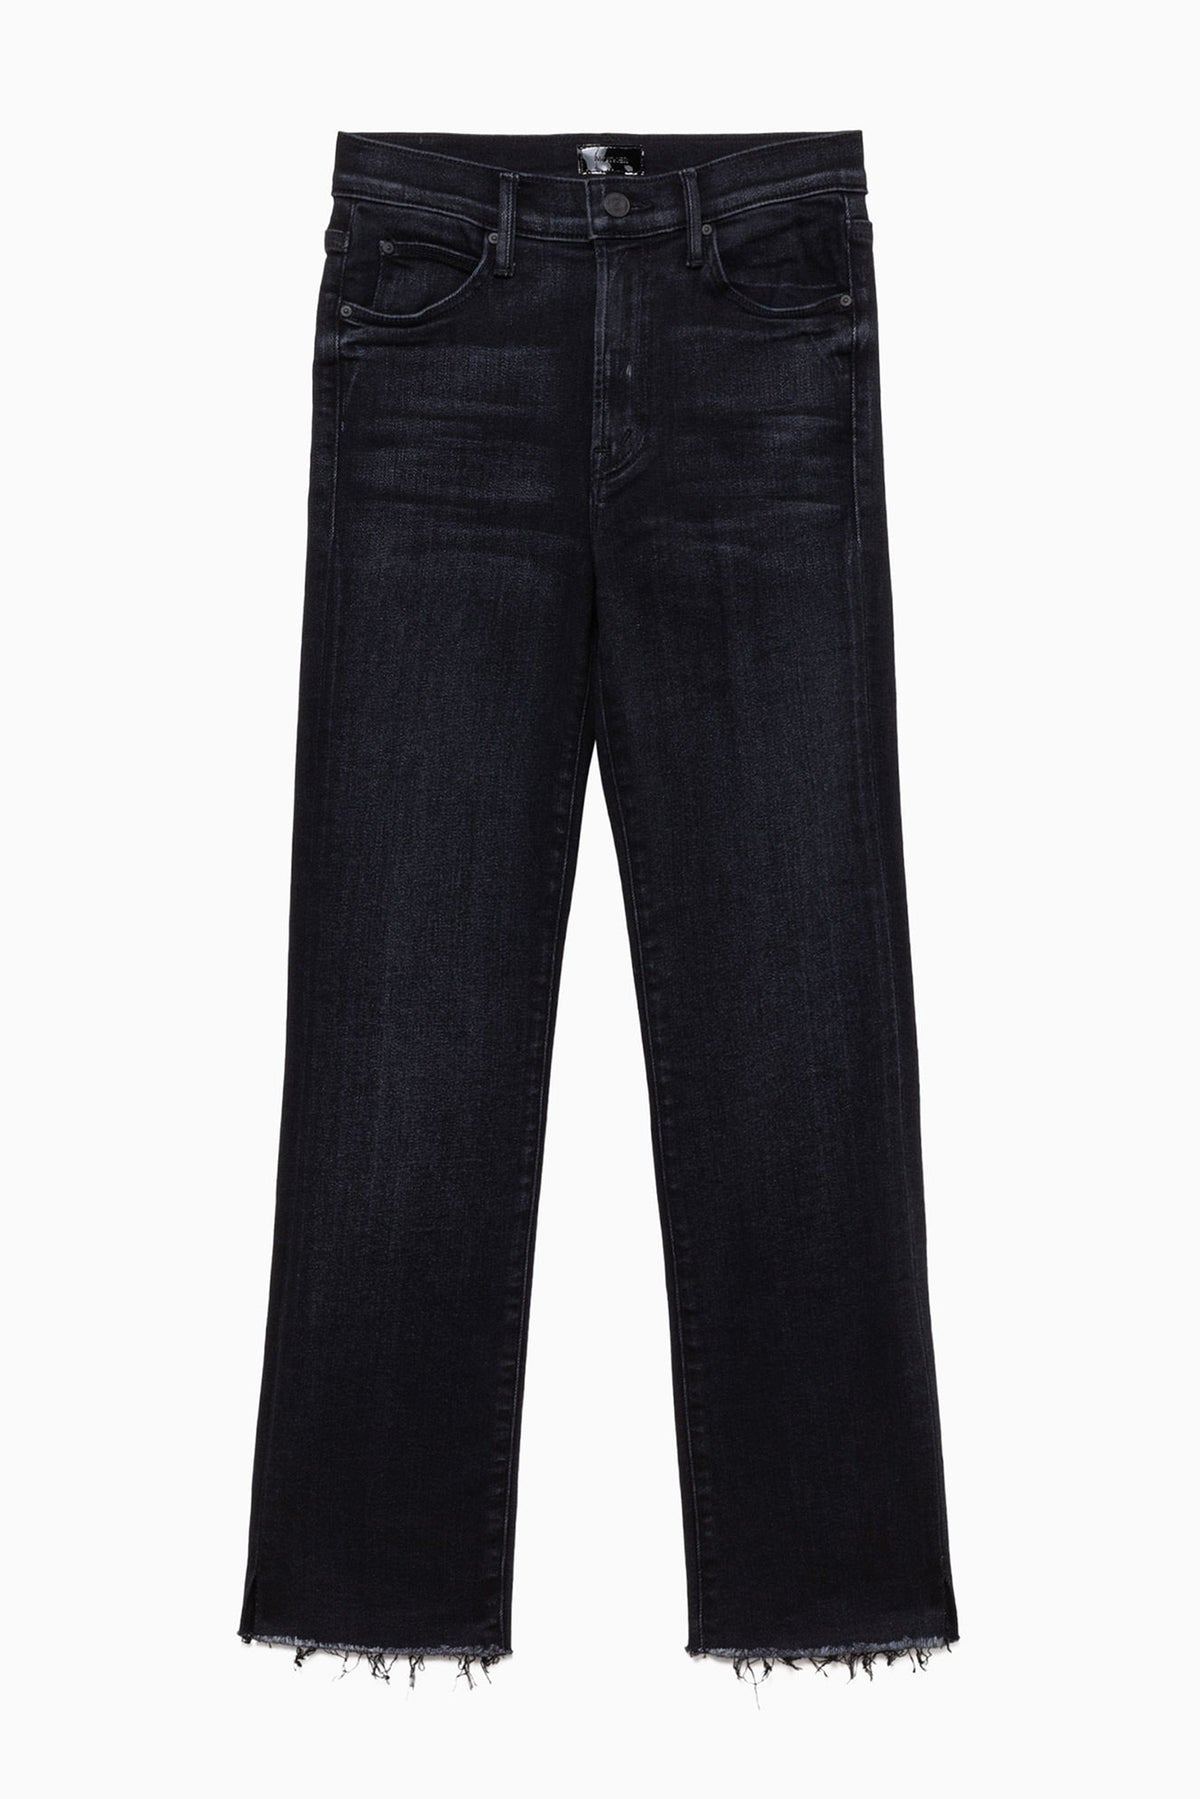 MOTHER PANTALONE IN DENIM  NERO / 23 Jeans Mother Nero The Rascal Ankle Snippet